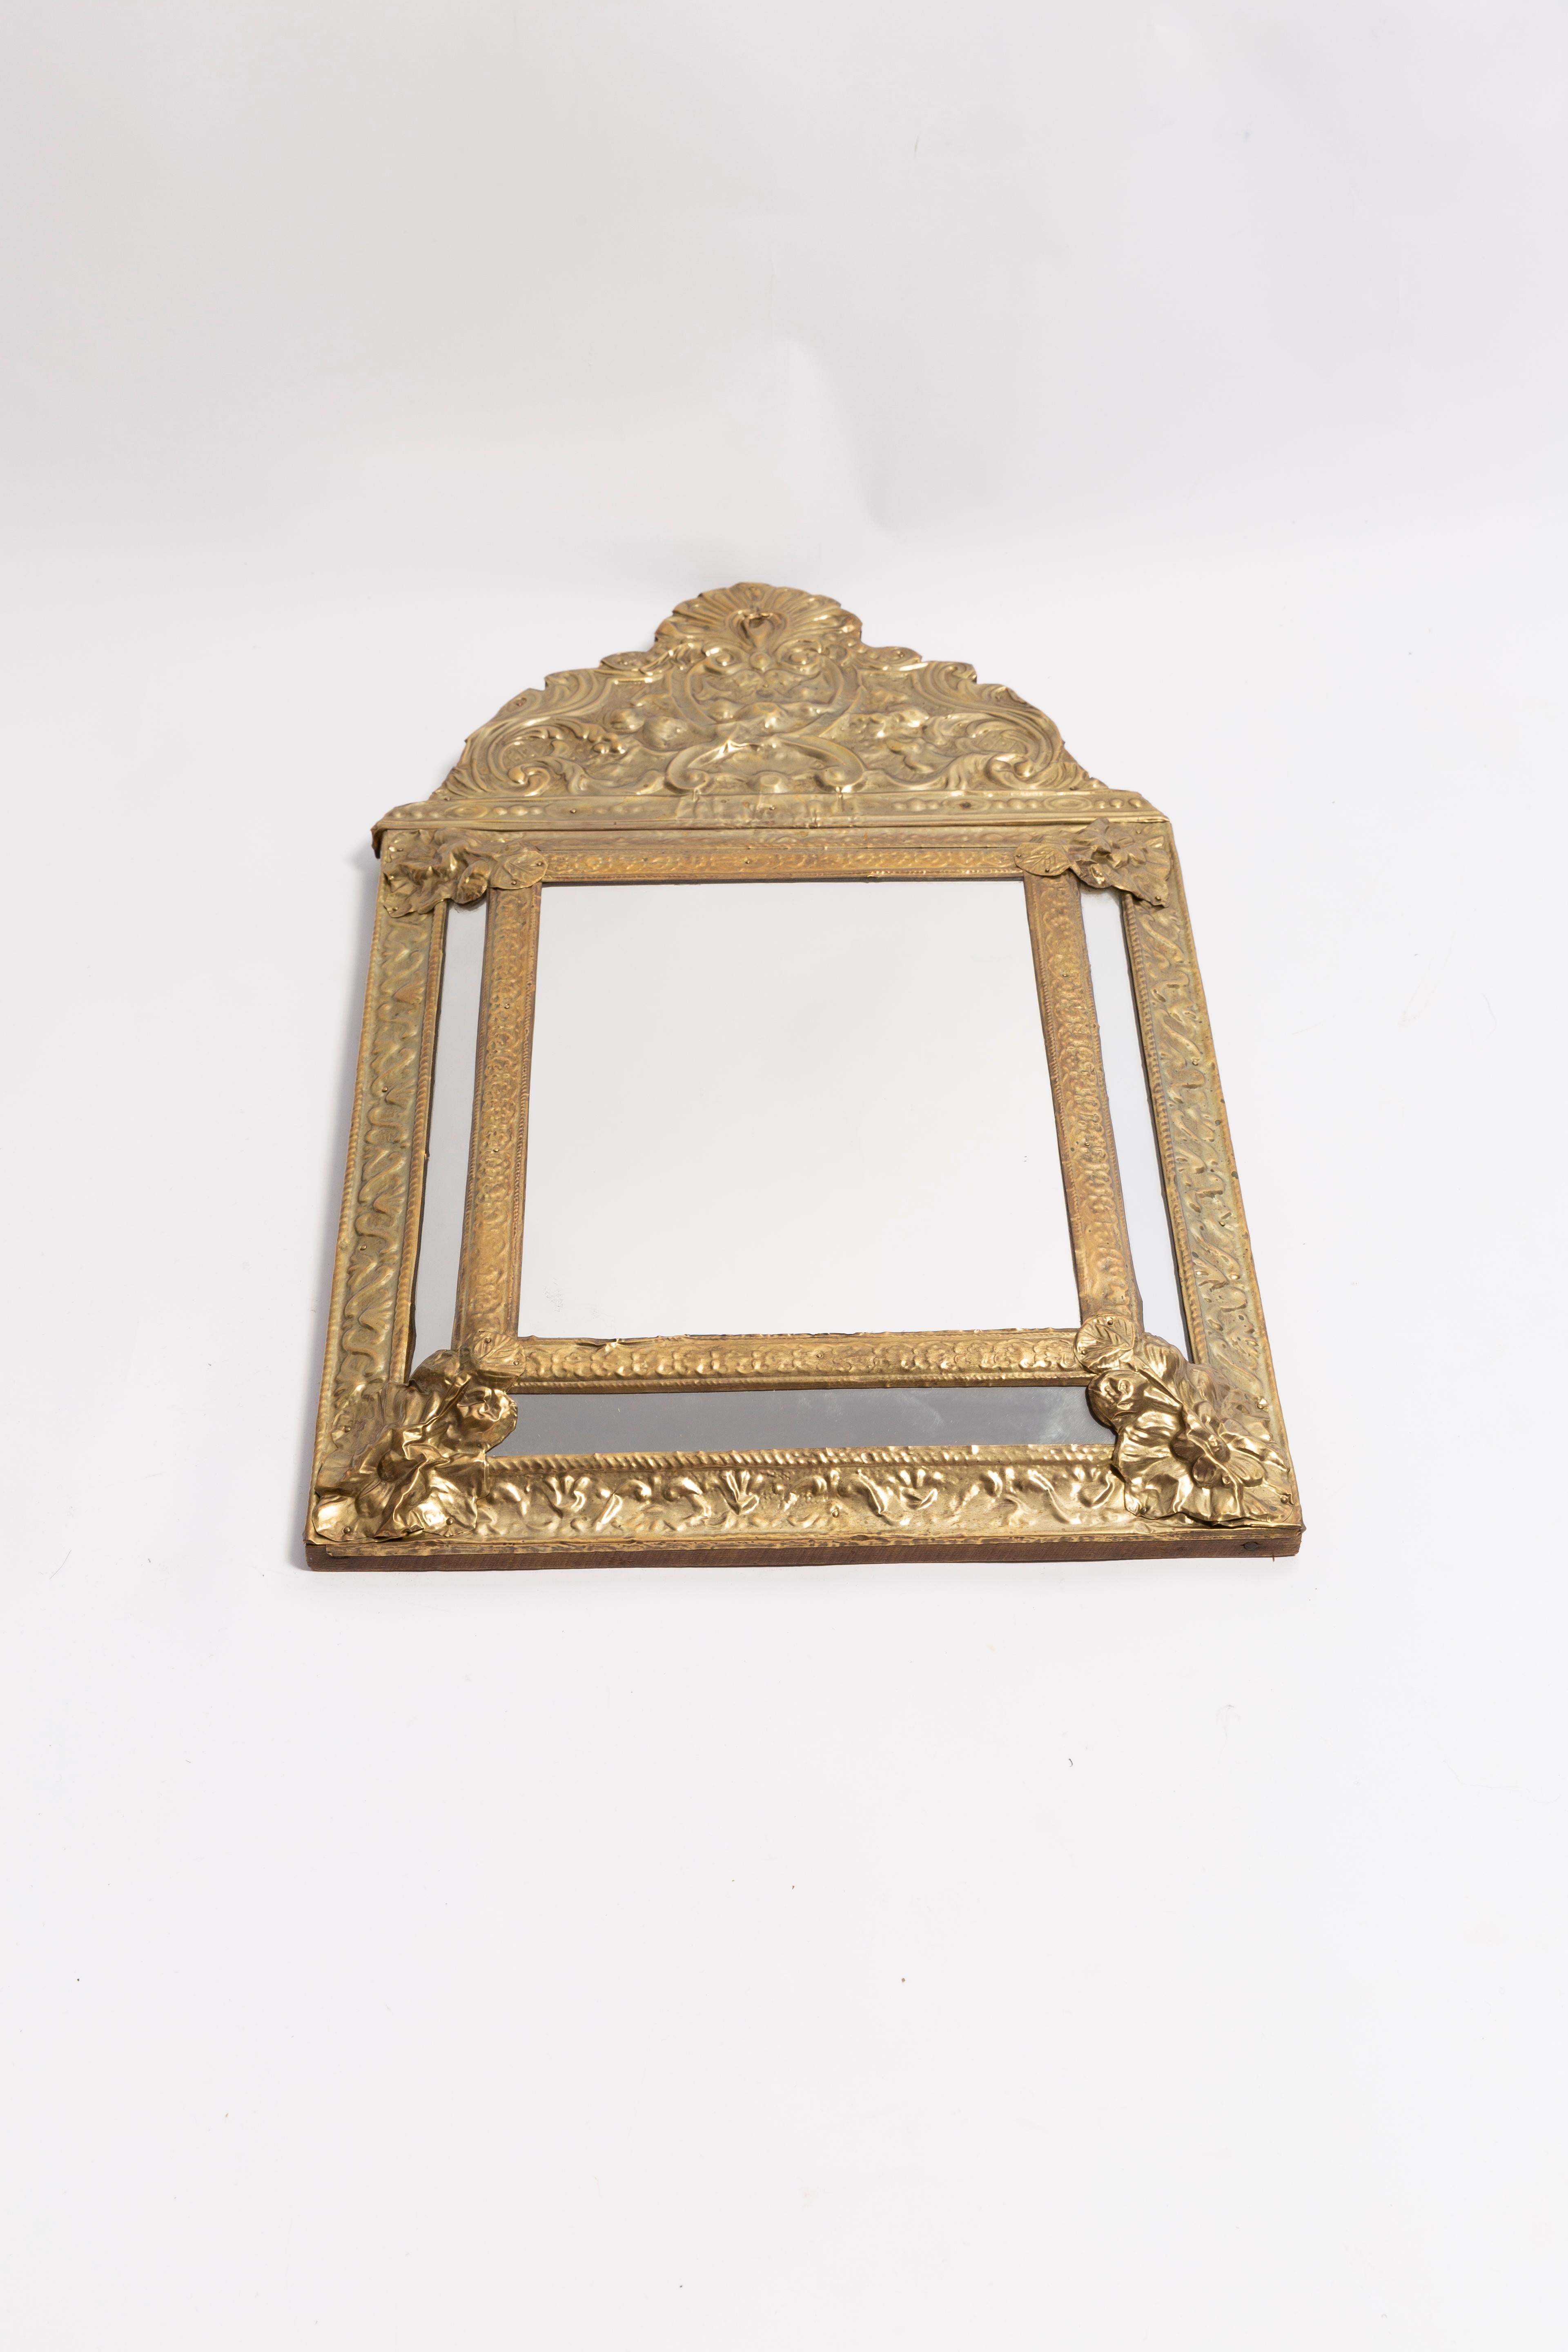 A beautiful medium size mirror in a golden/blue decorative frame with flowers from Italy. The frame is made of metal. Mirror is in very good vintage condition, no damage or cracks in the frame. Original glass. Beautiful piece for every interior!